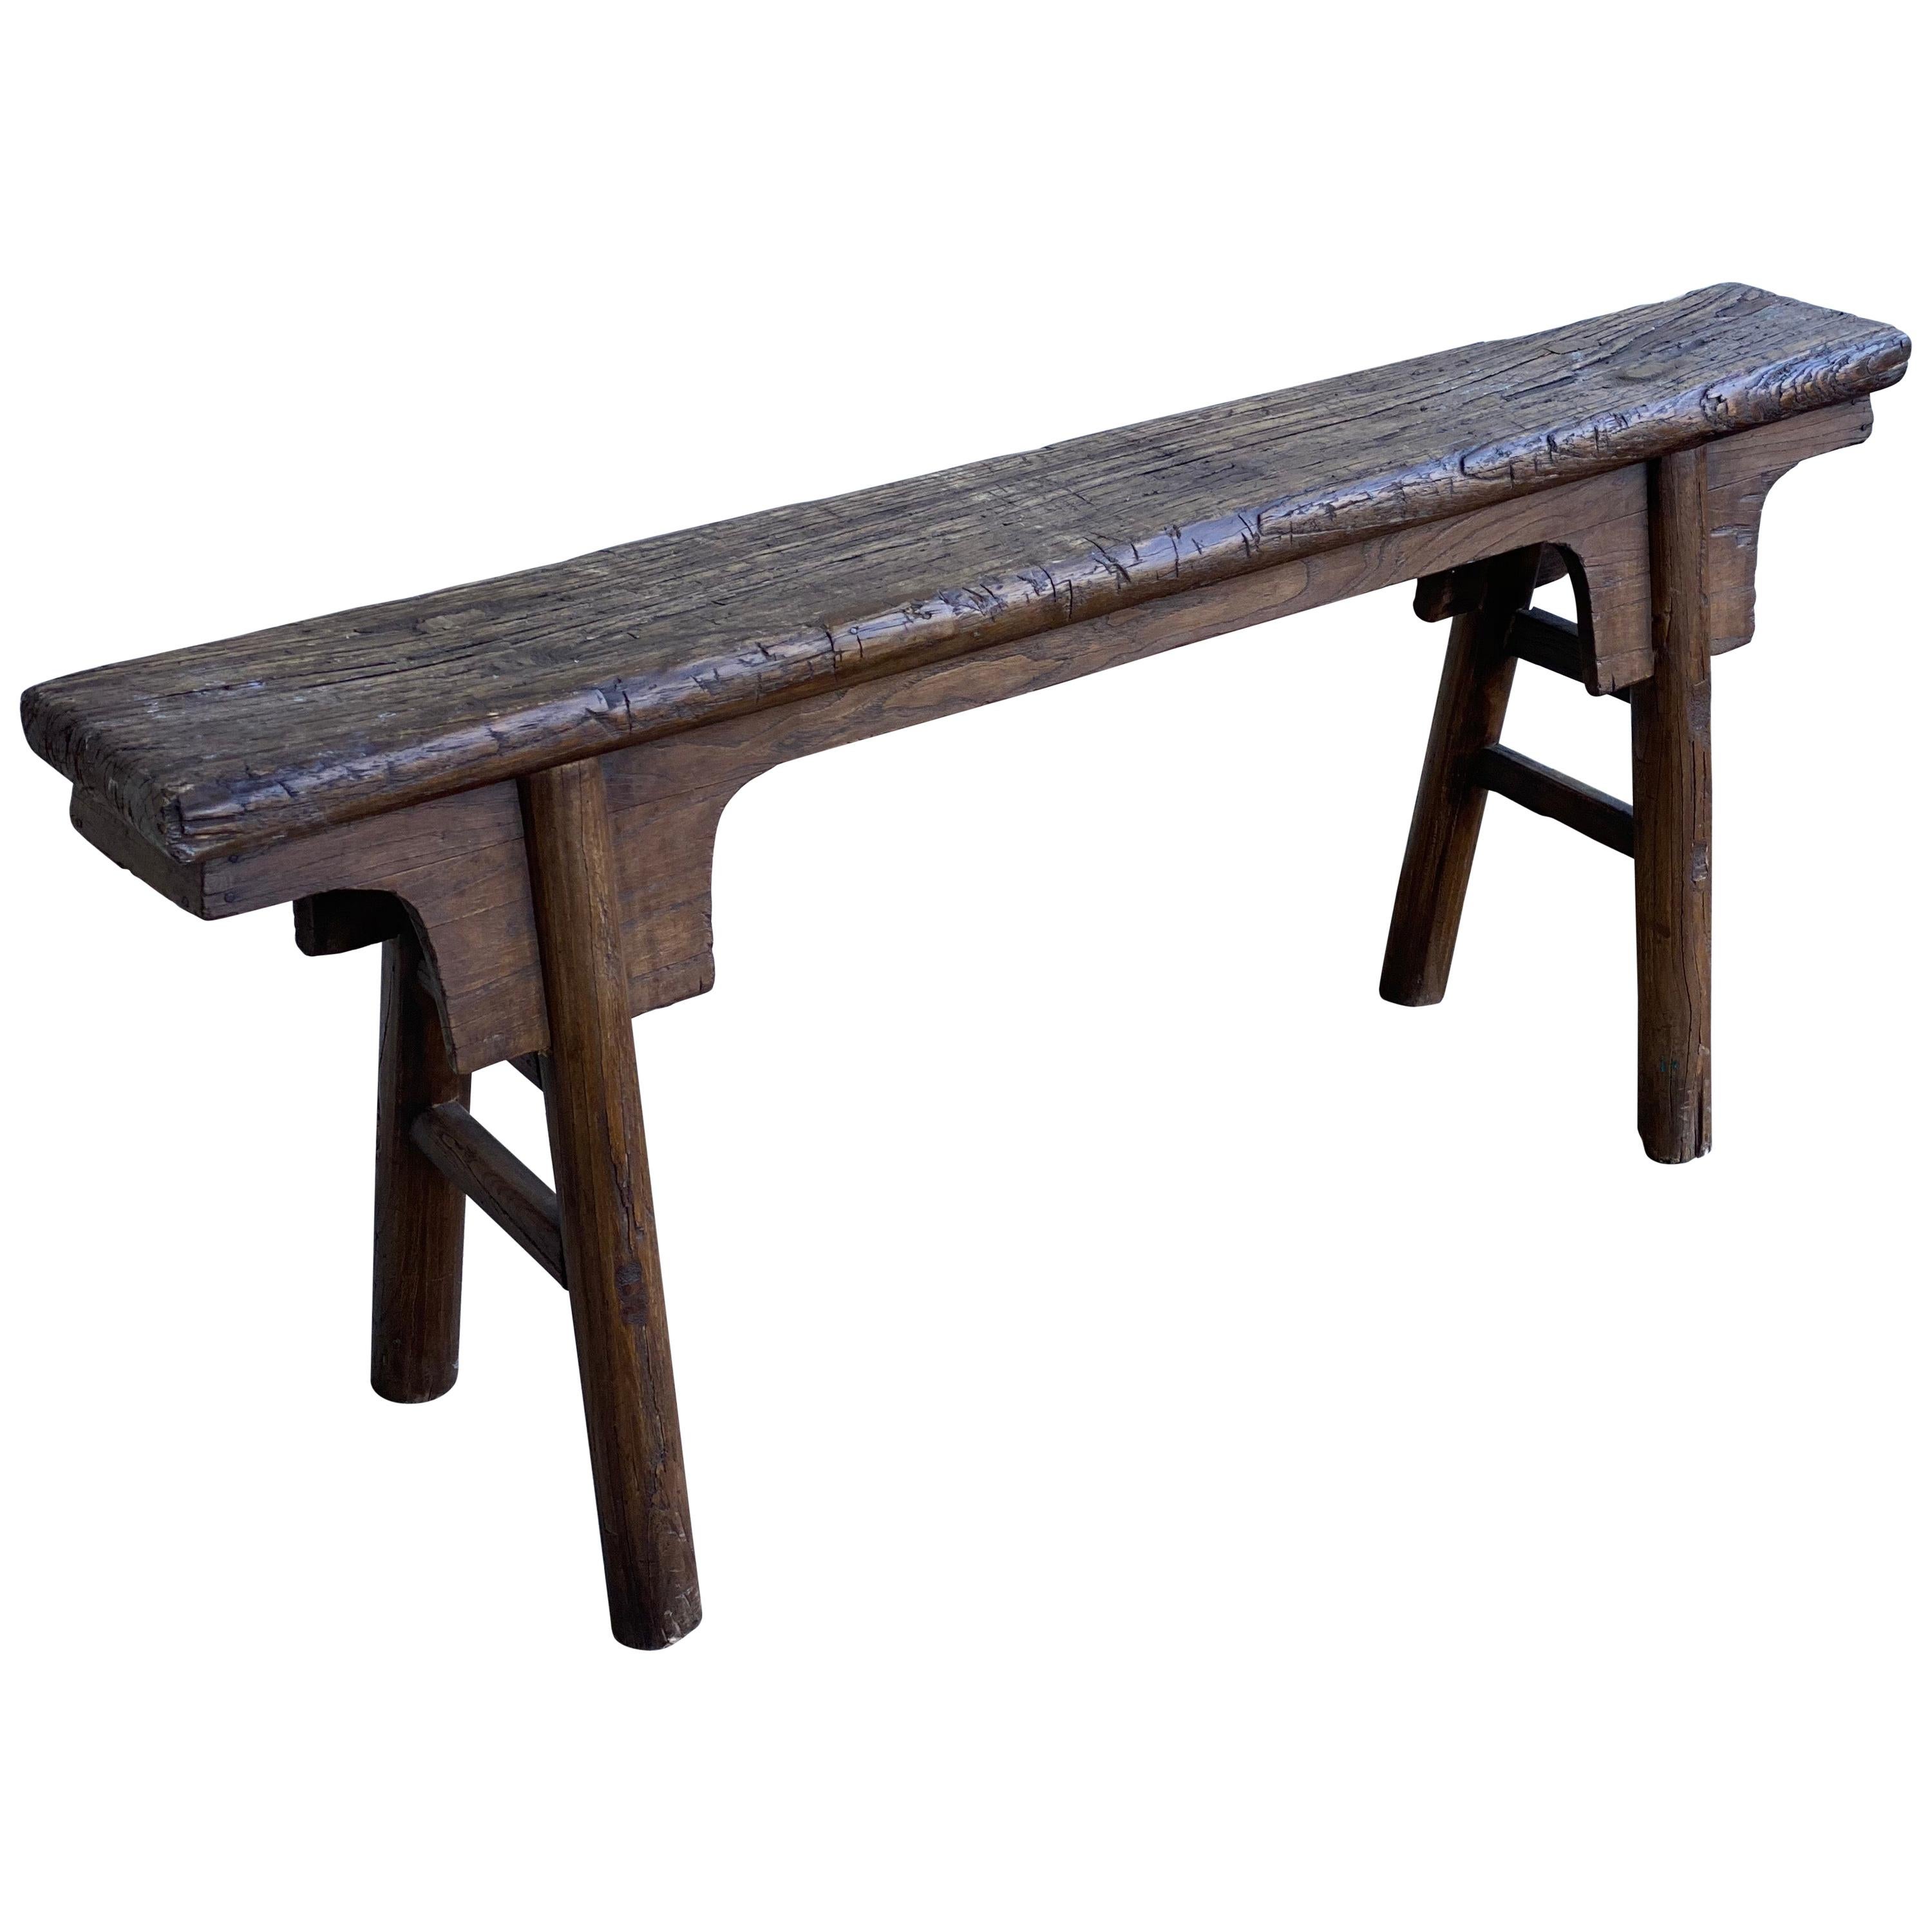 Tall rustic Chinese wood bench. Tall and narrow. A-framed legs.
Import permission wax stamp. Signature on bottom.
Measures: 51 1/8